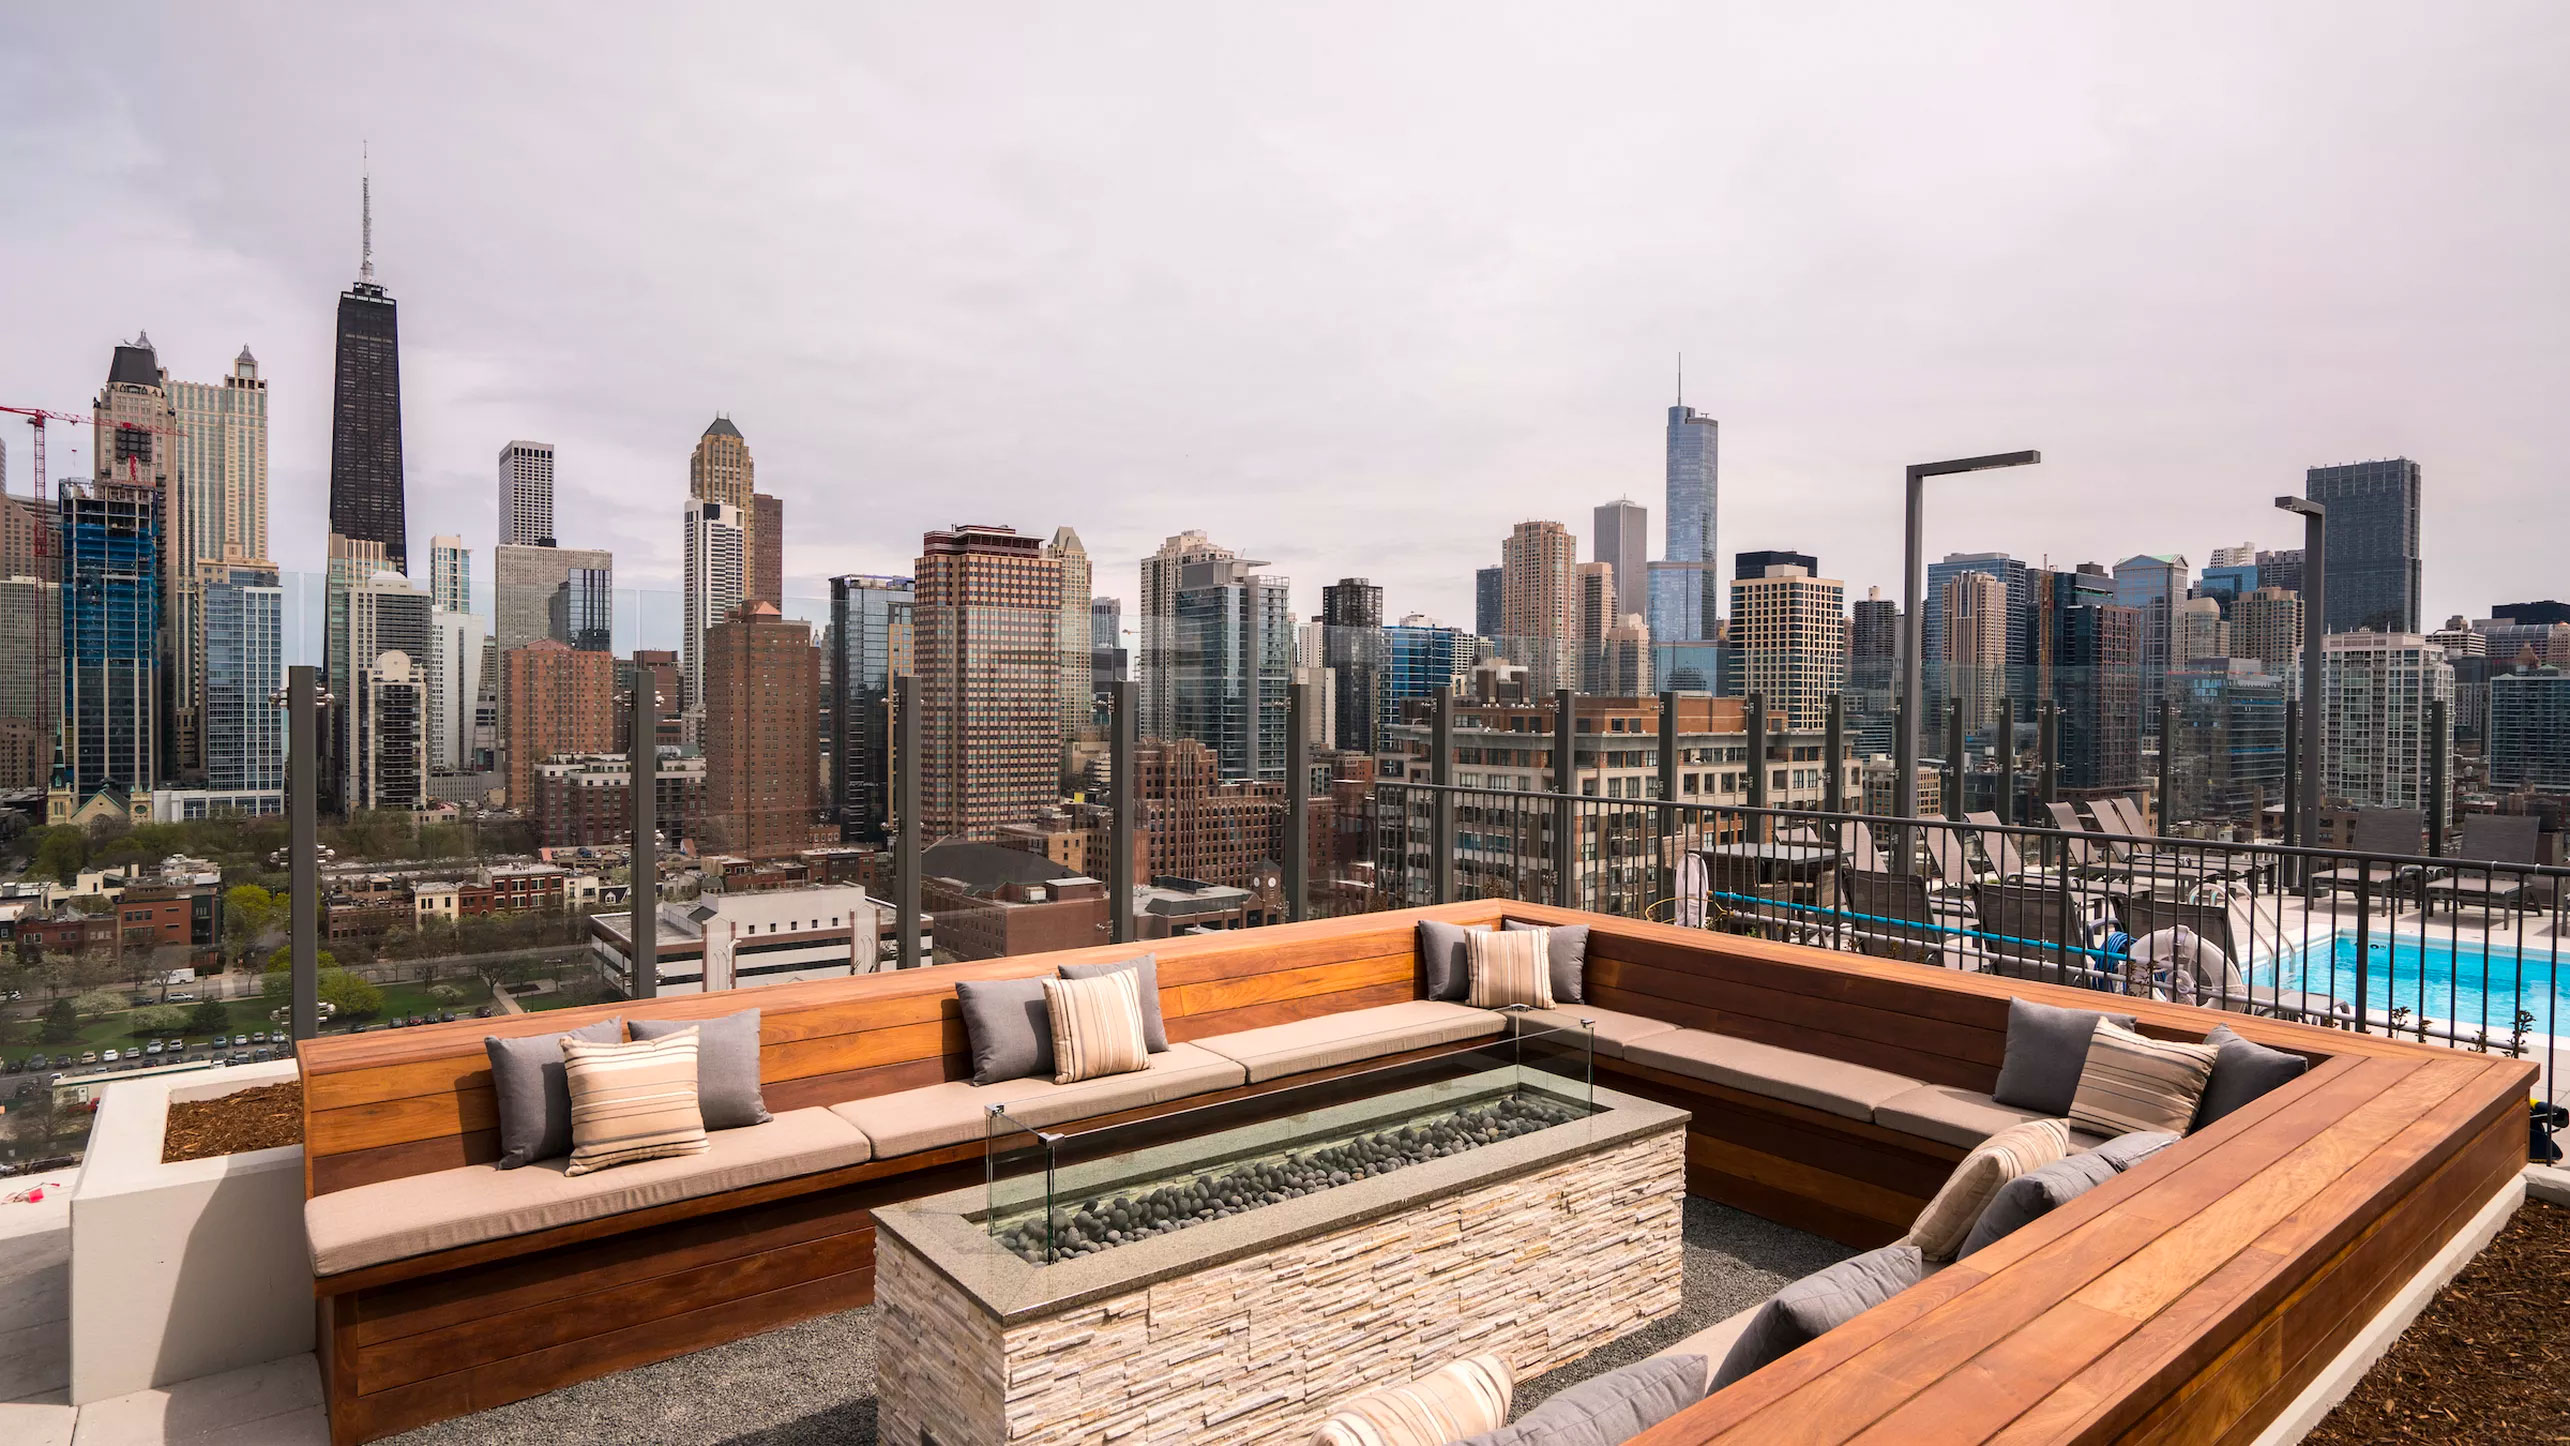 Rooftop fire pit lounge area with pool and city skyline views